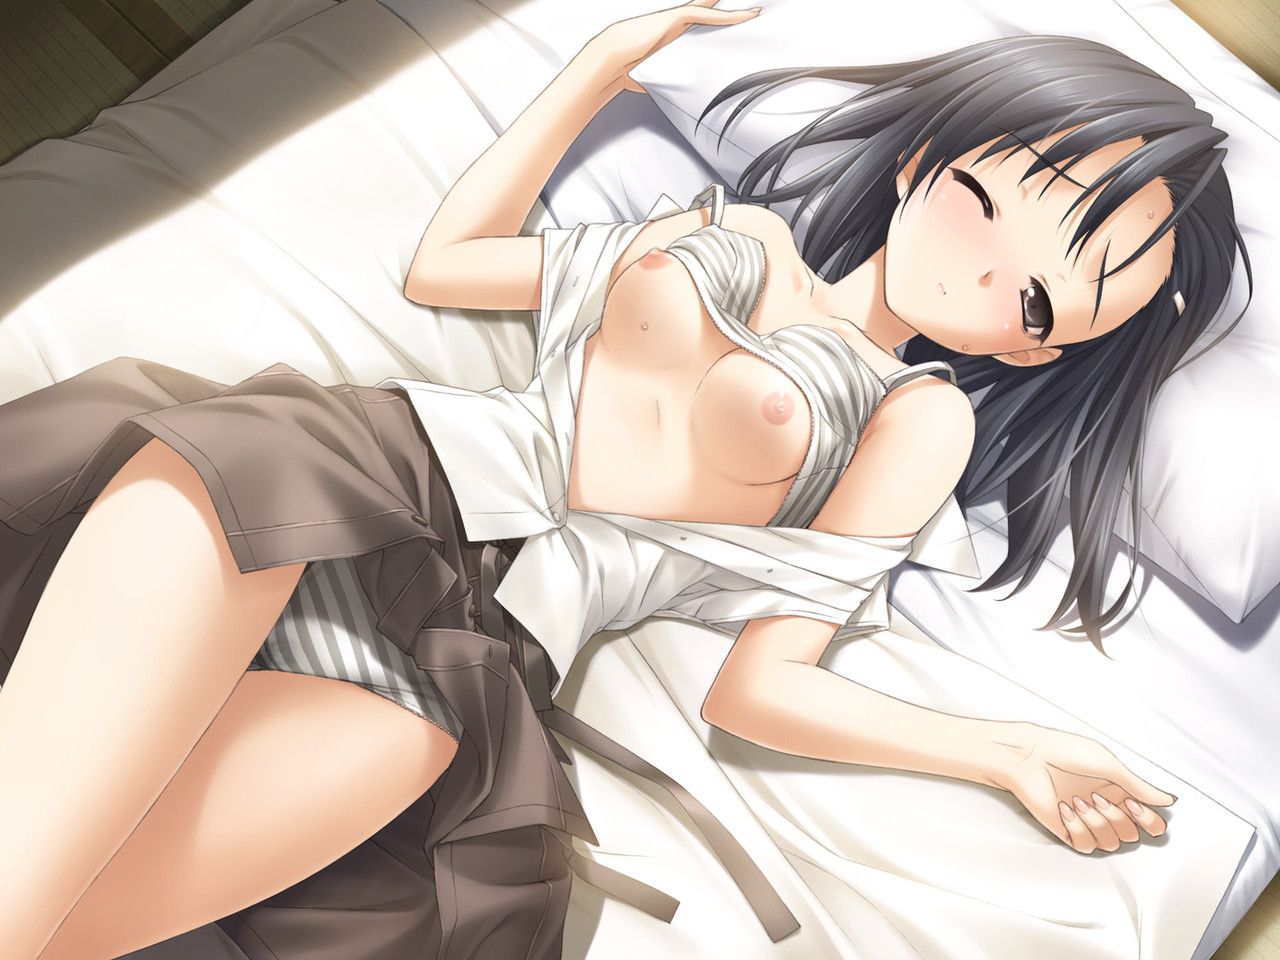 Two-dimensional beautiful girl's Erokawa image is pasted intently vol.922 52